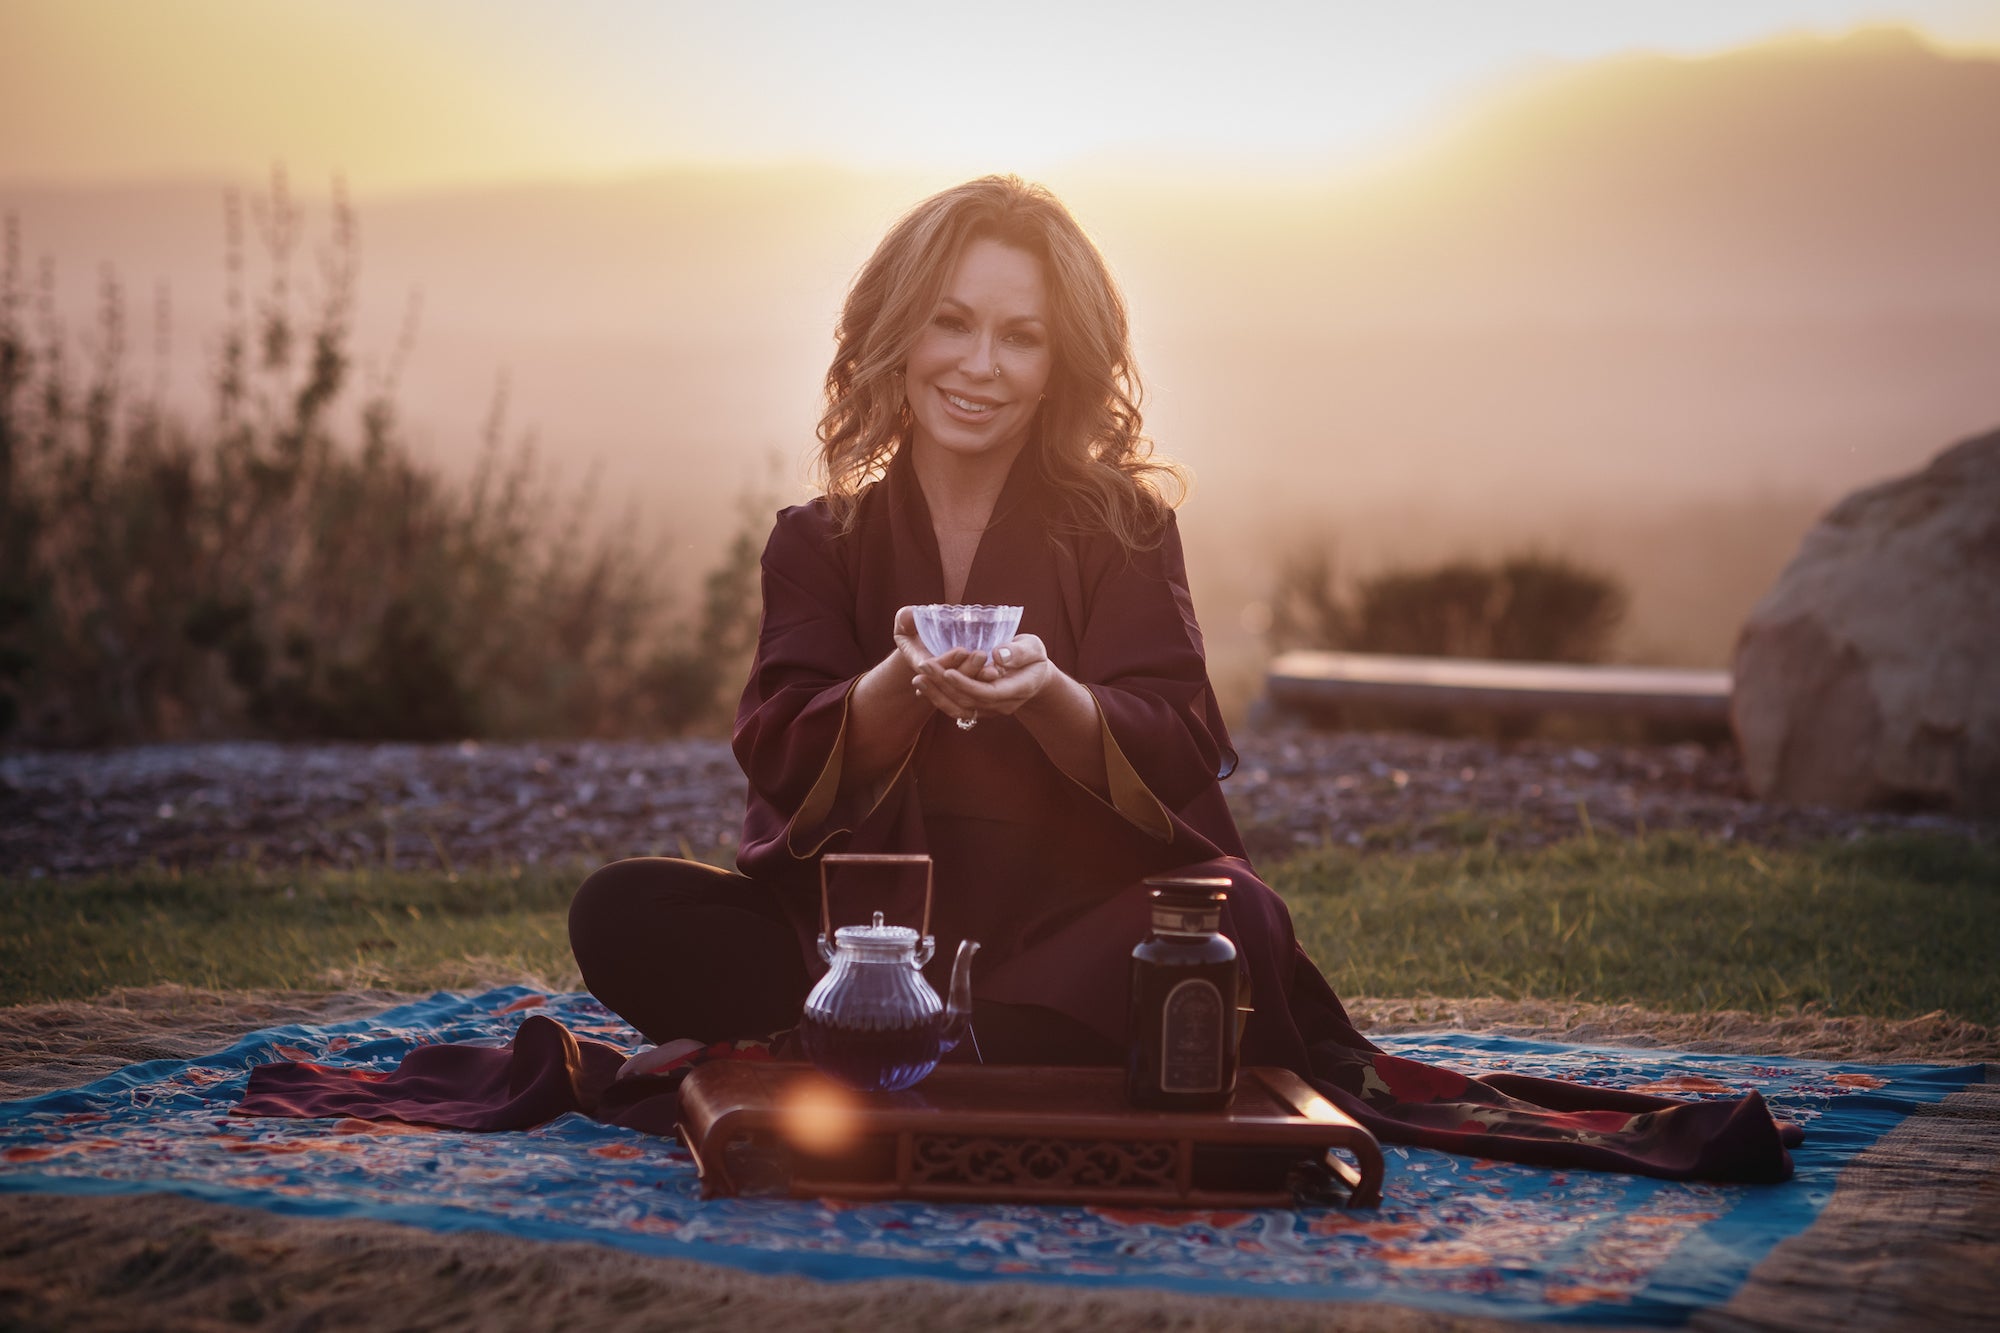 Zhena Holding a Cup of Tea at Sunset